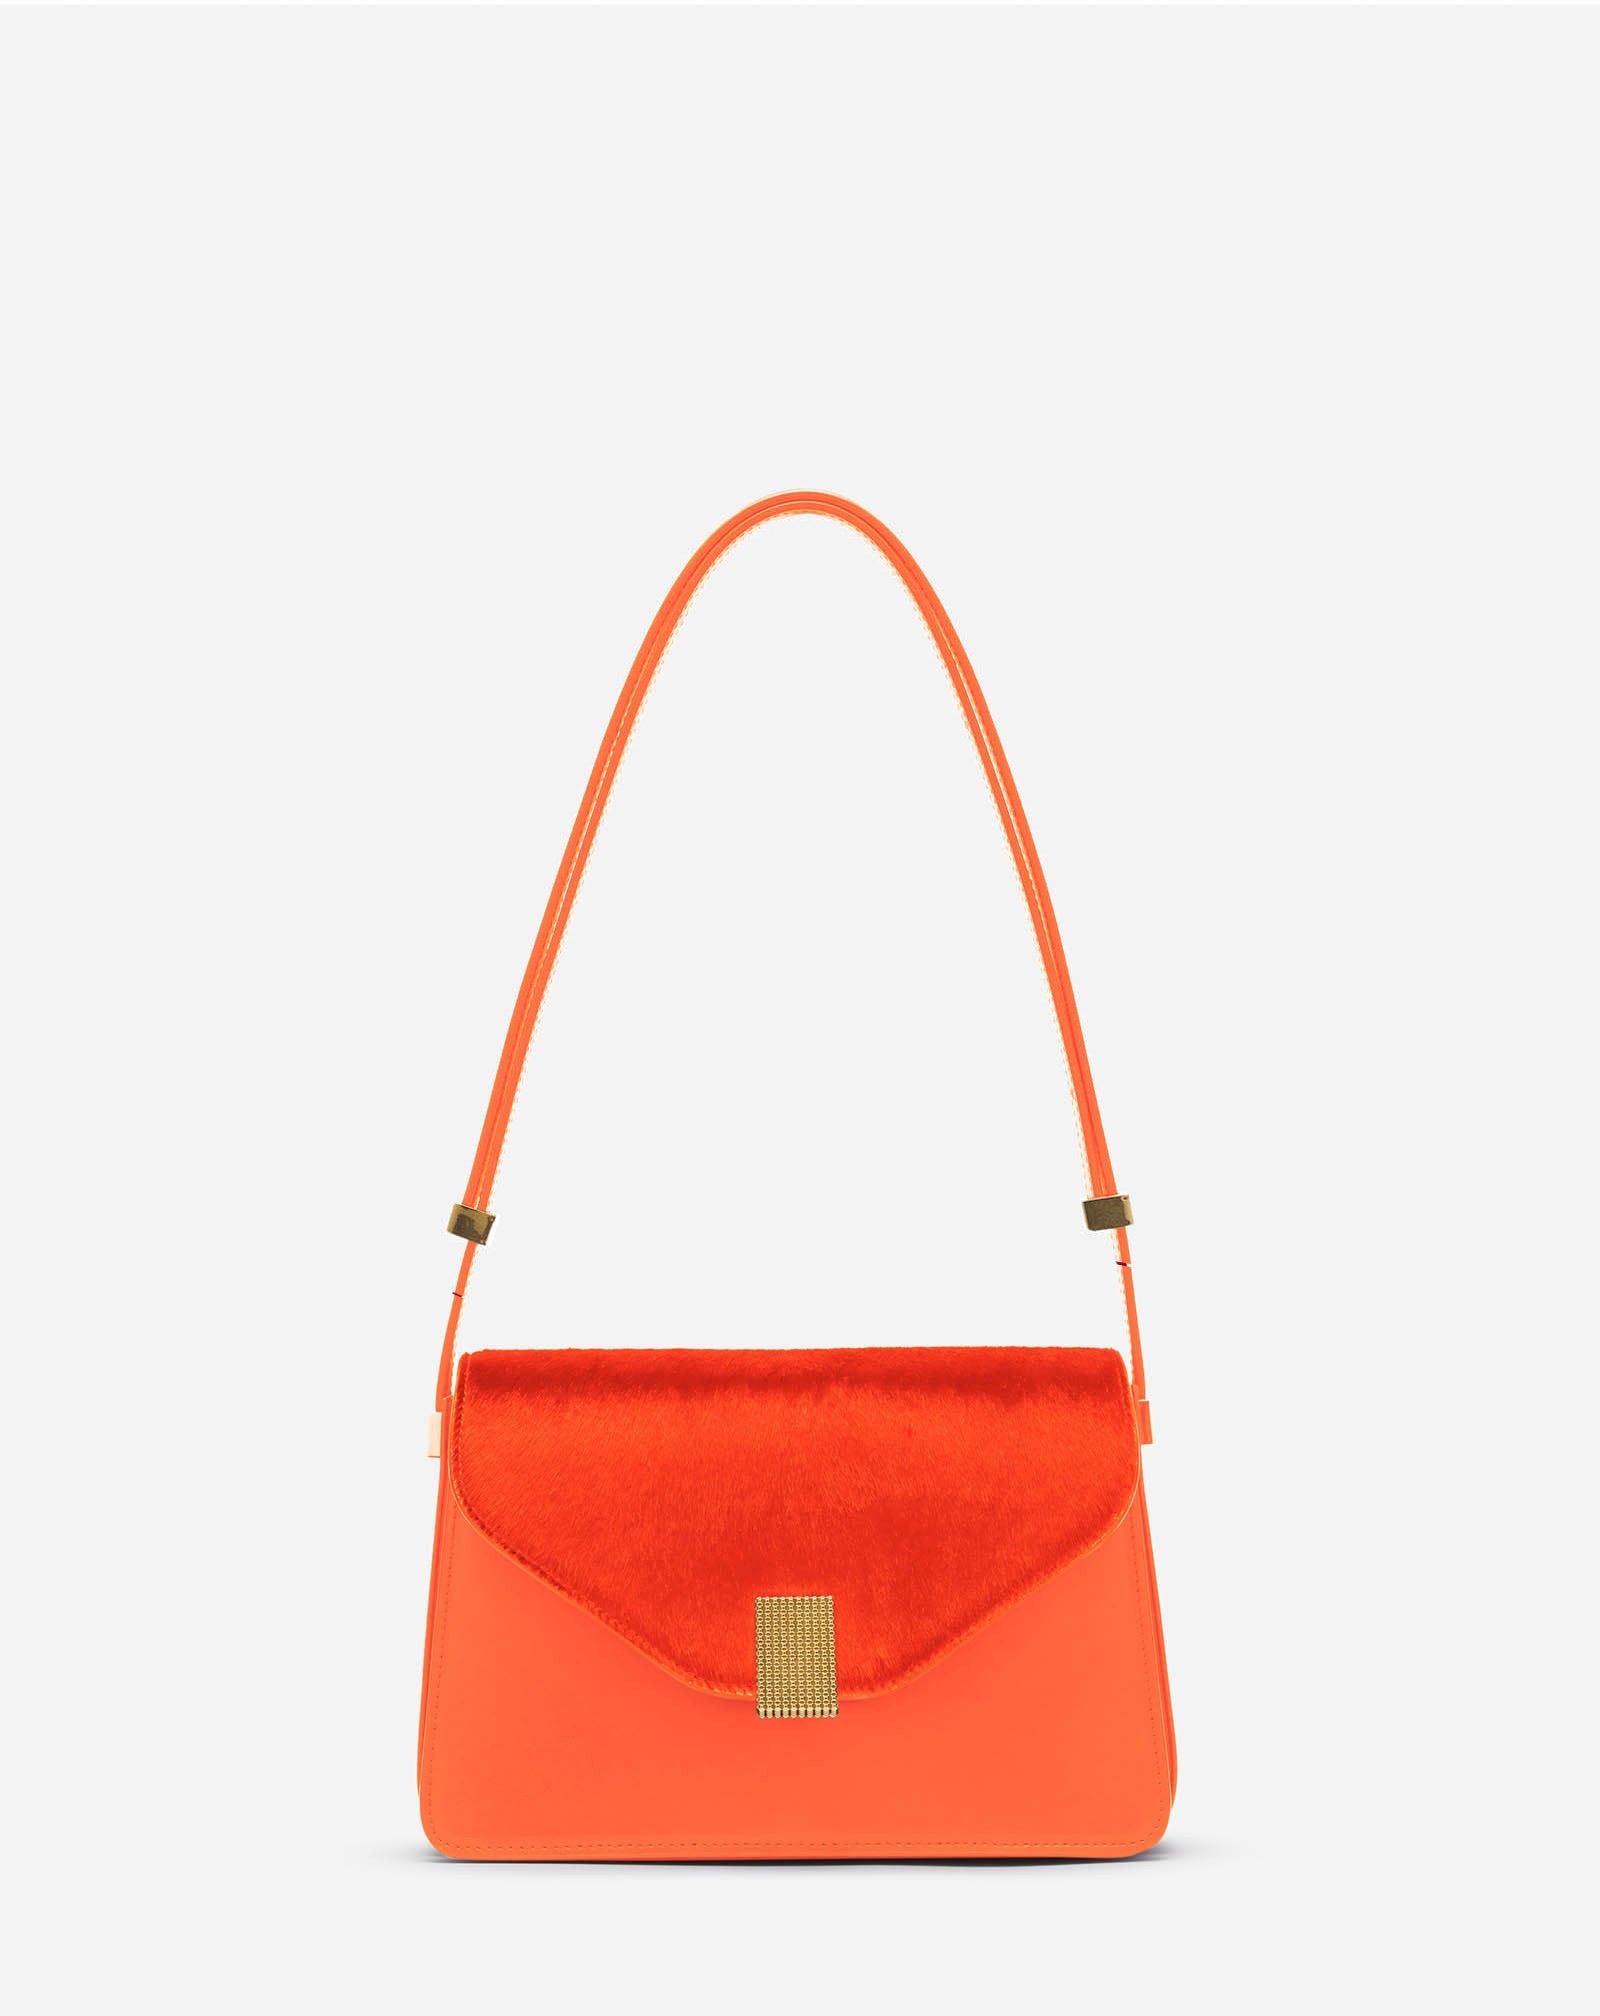 PM CONCERTO BAG IN PONY EFFECT LEATHER - 1